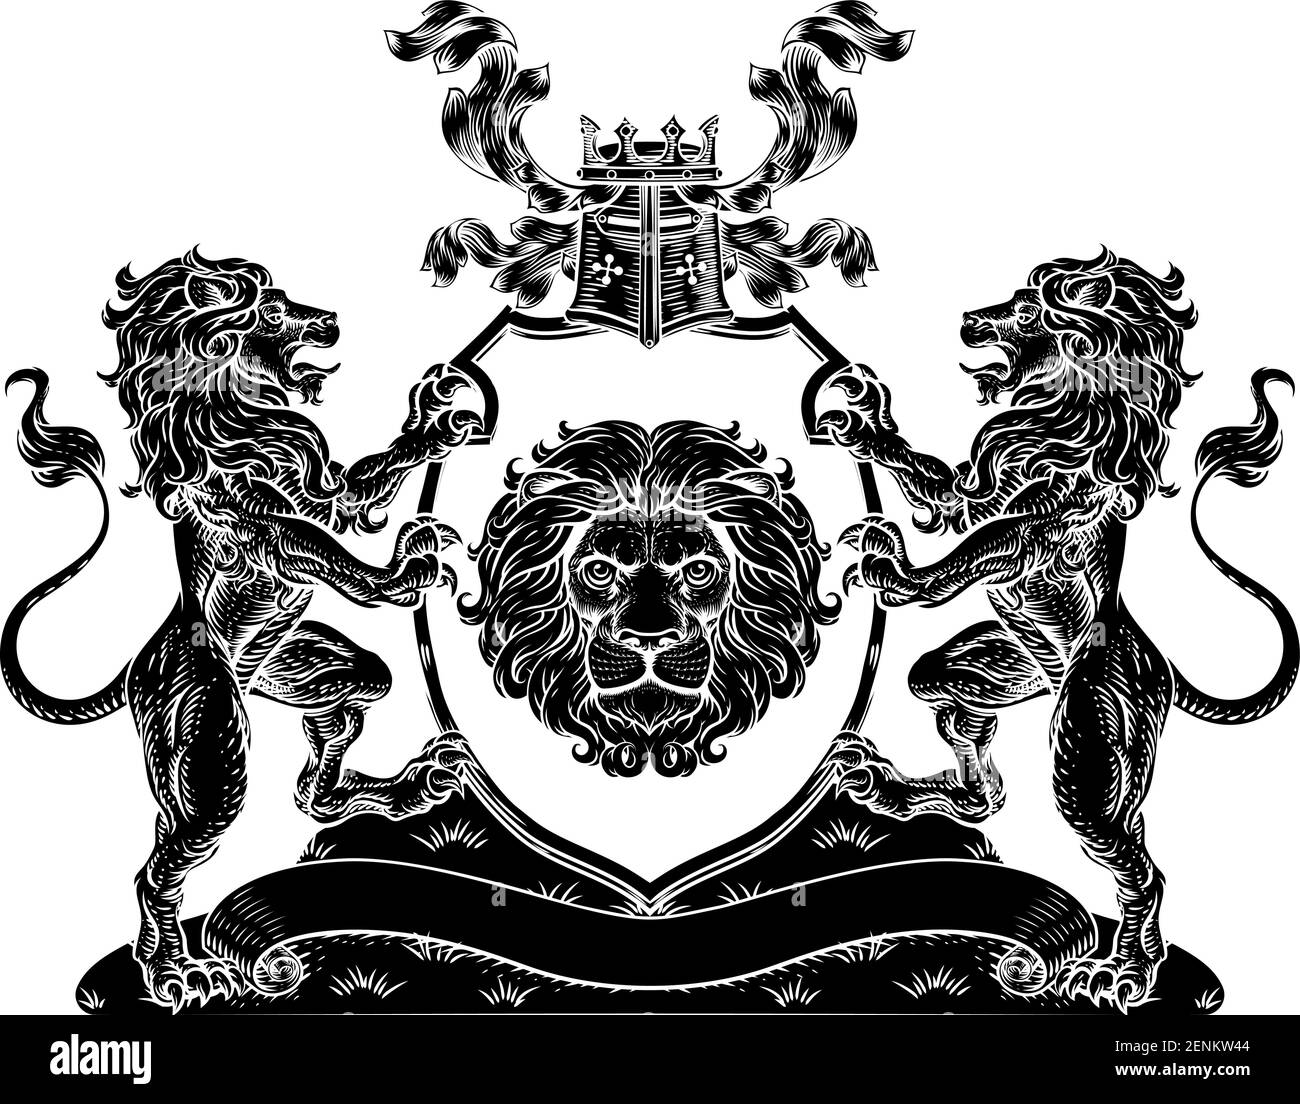 Coat of Arms Lions Crest Shield Family Seal Stock Vector